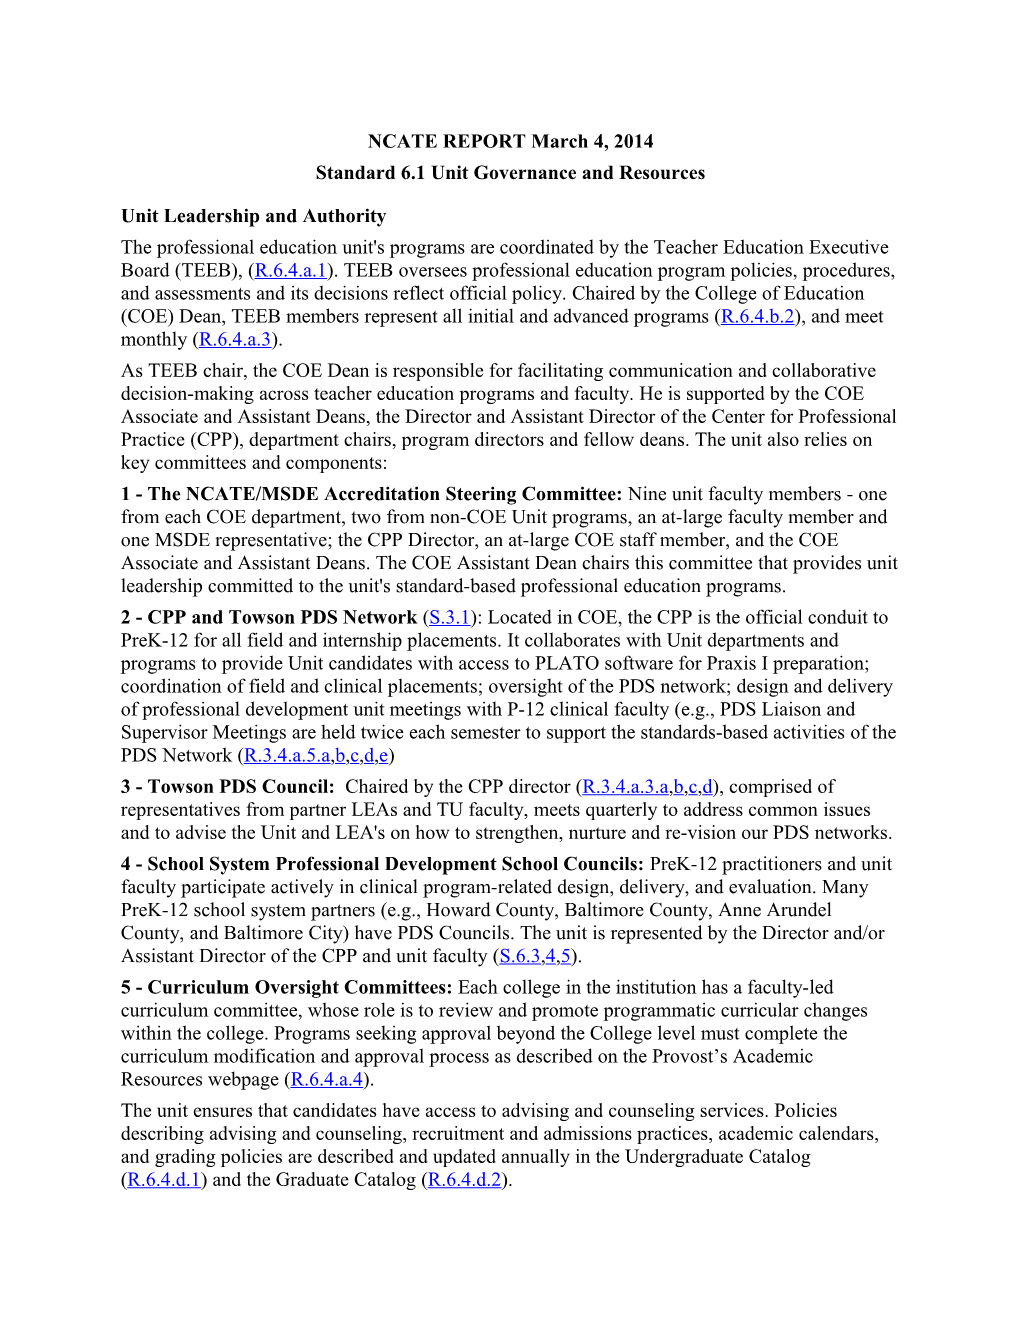 Standard 6.1 Unit Governance and Resources